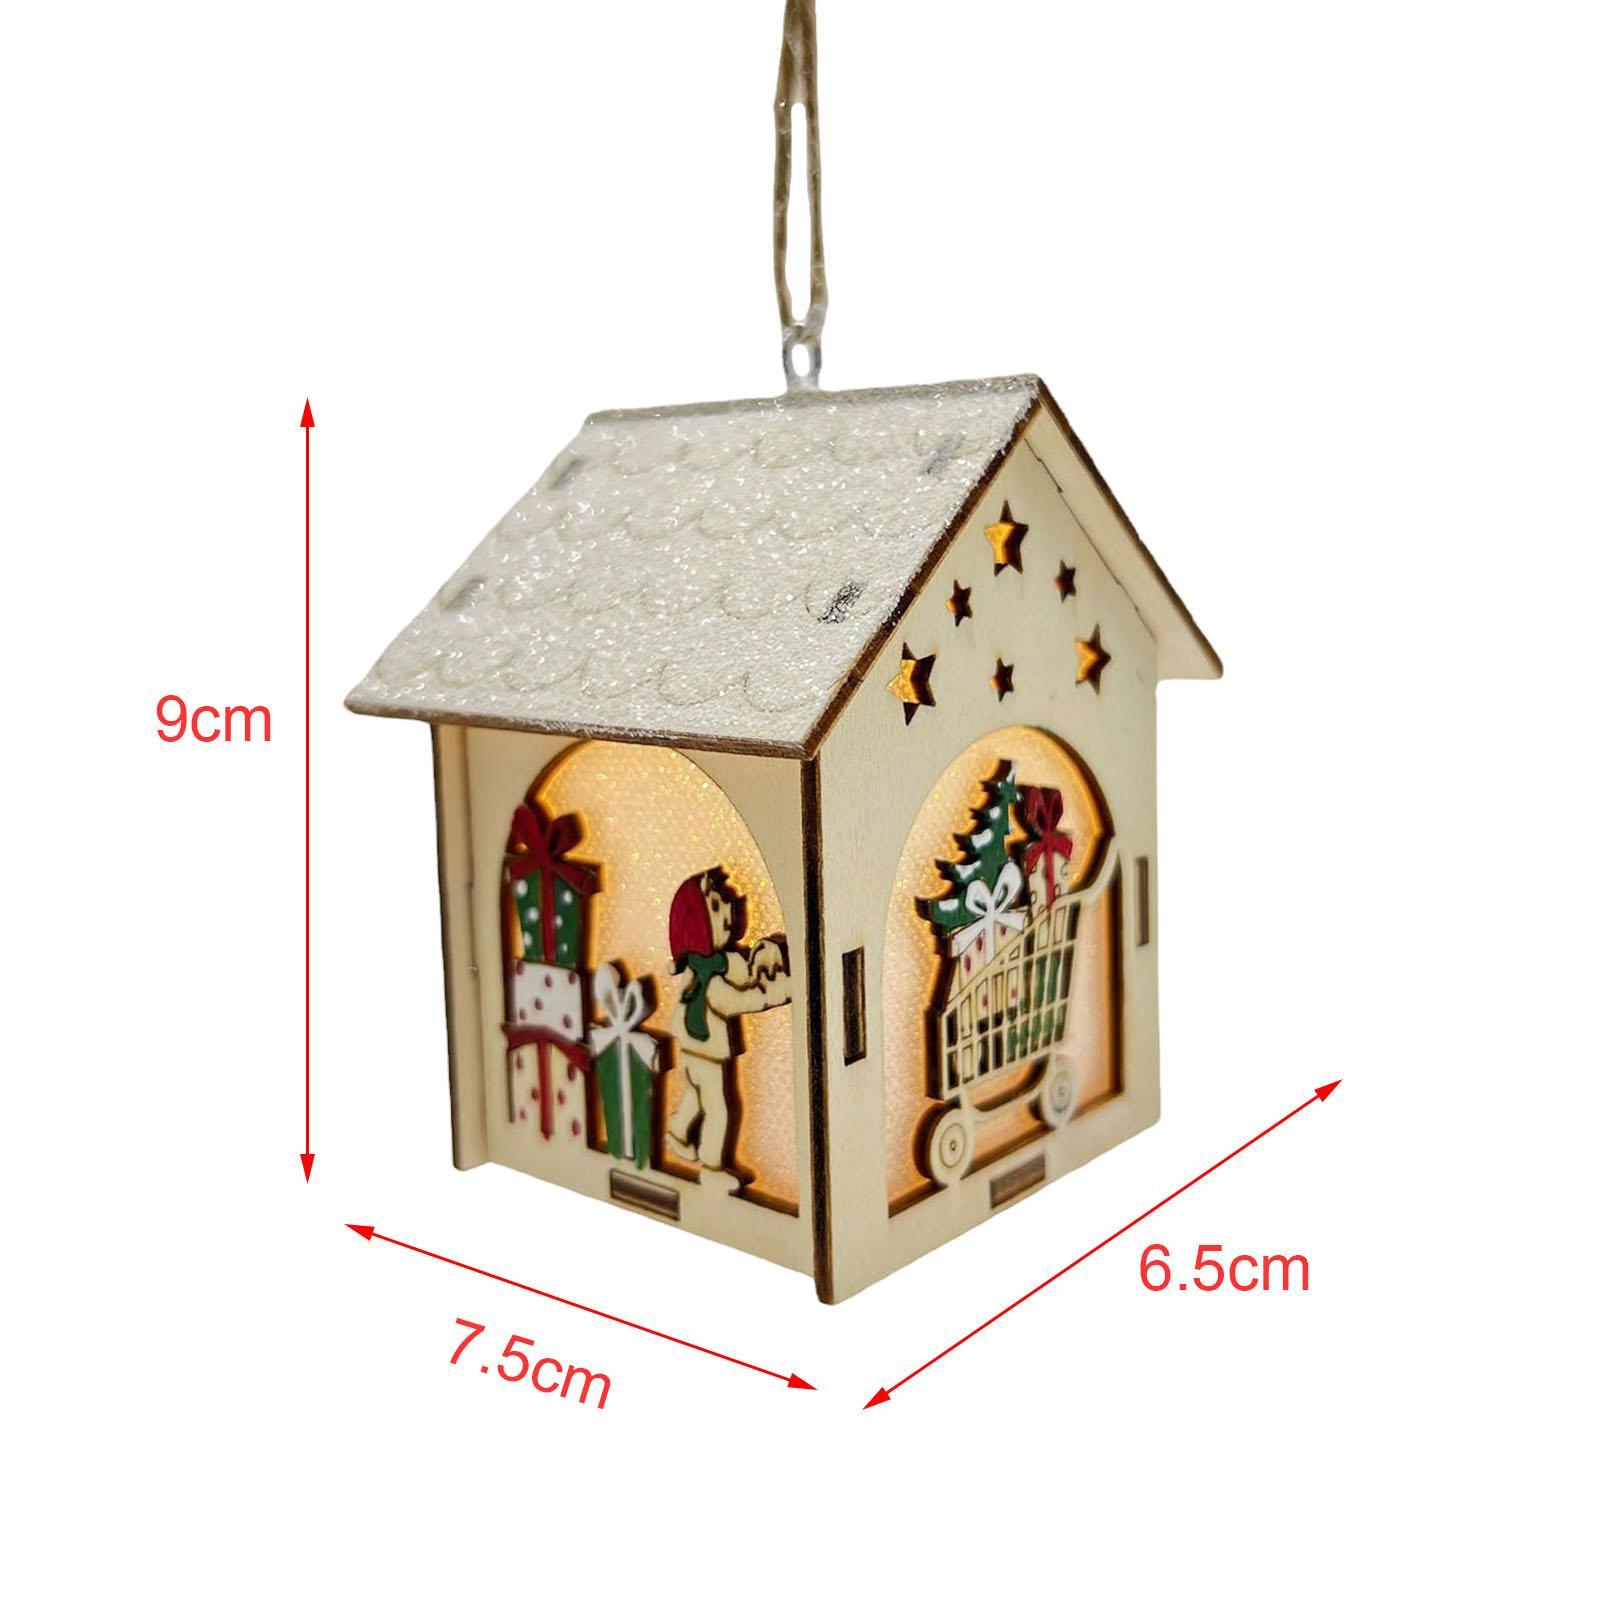 Mini Wooden House Building Set Lights up for Christmas Tabletop Decoration